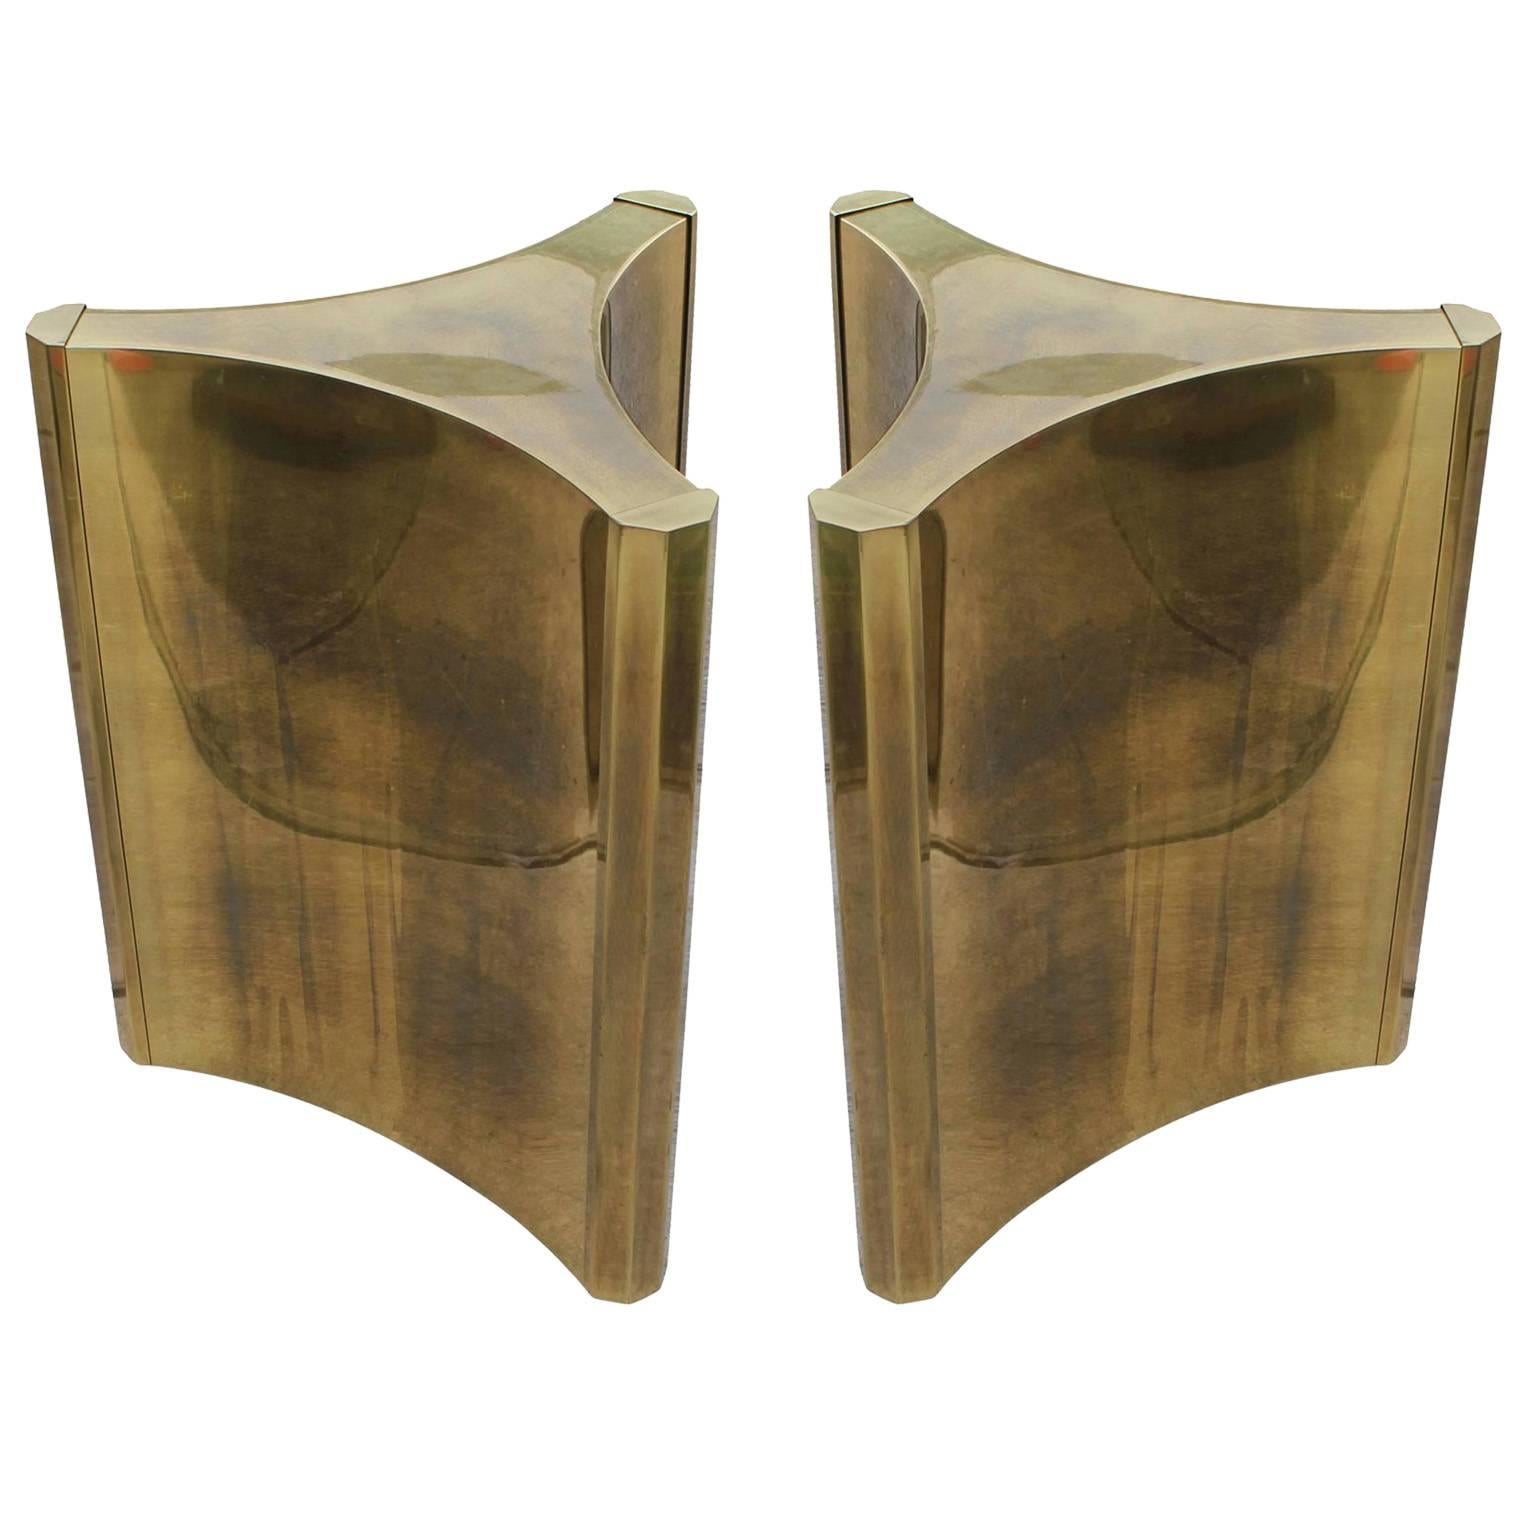 Luxe Pair of Brass Mastercraft Pedestal Table Bases